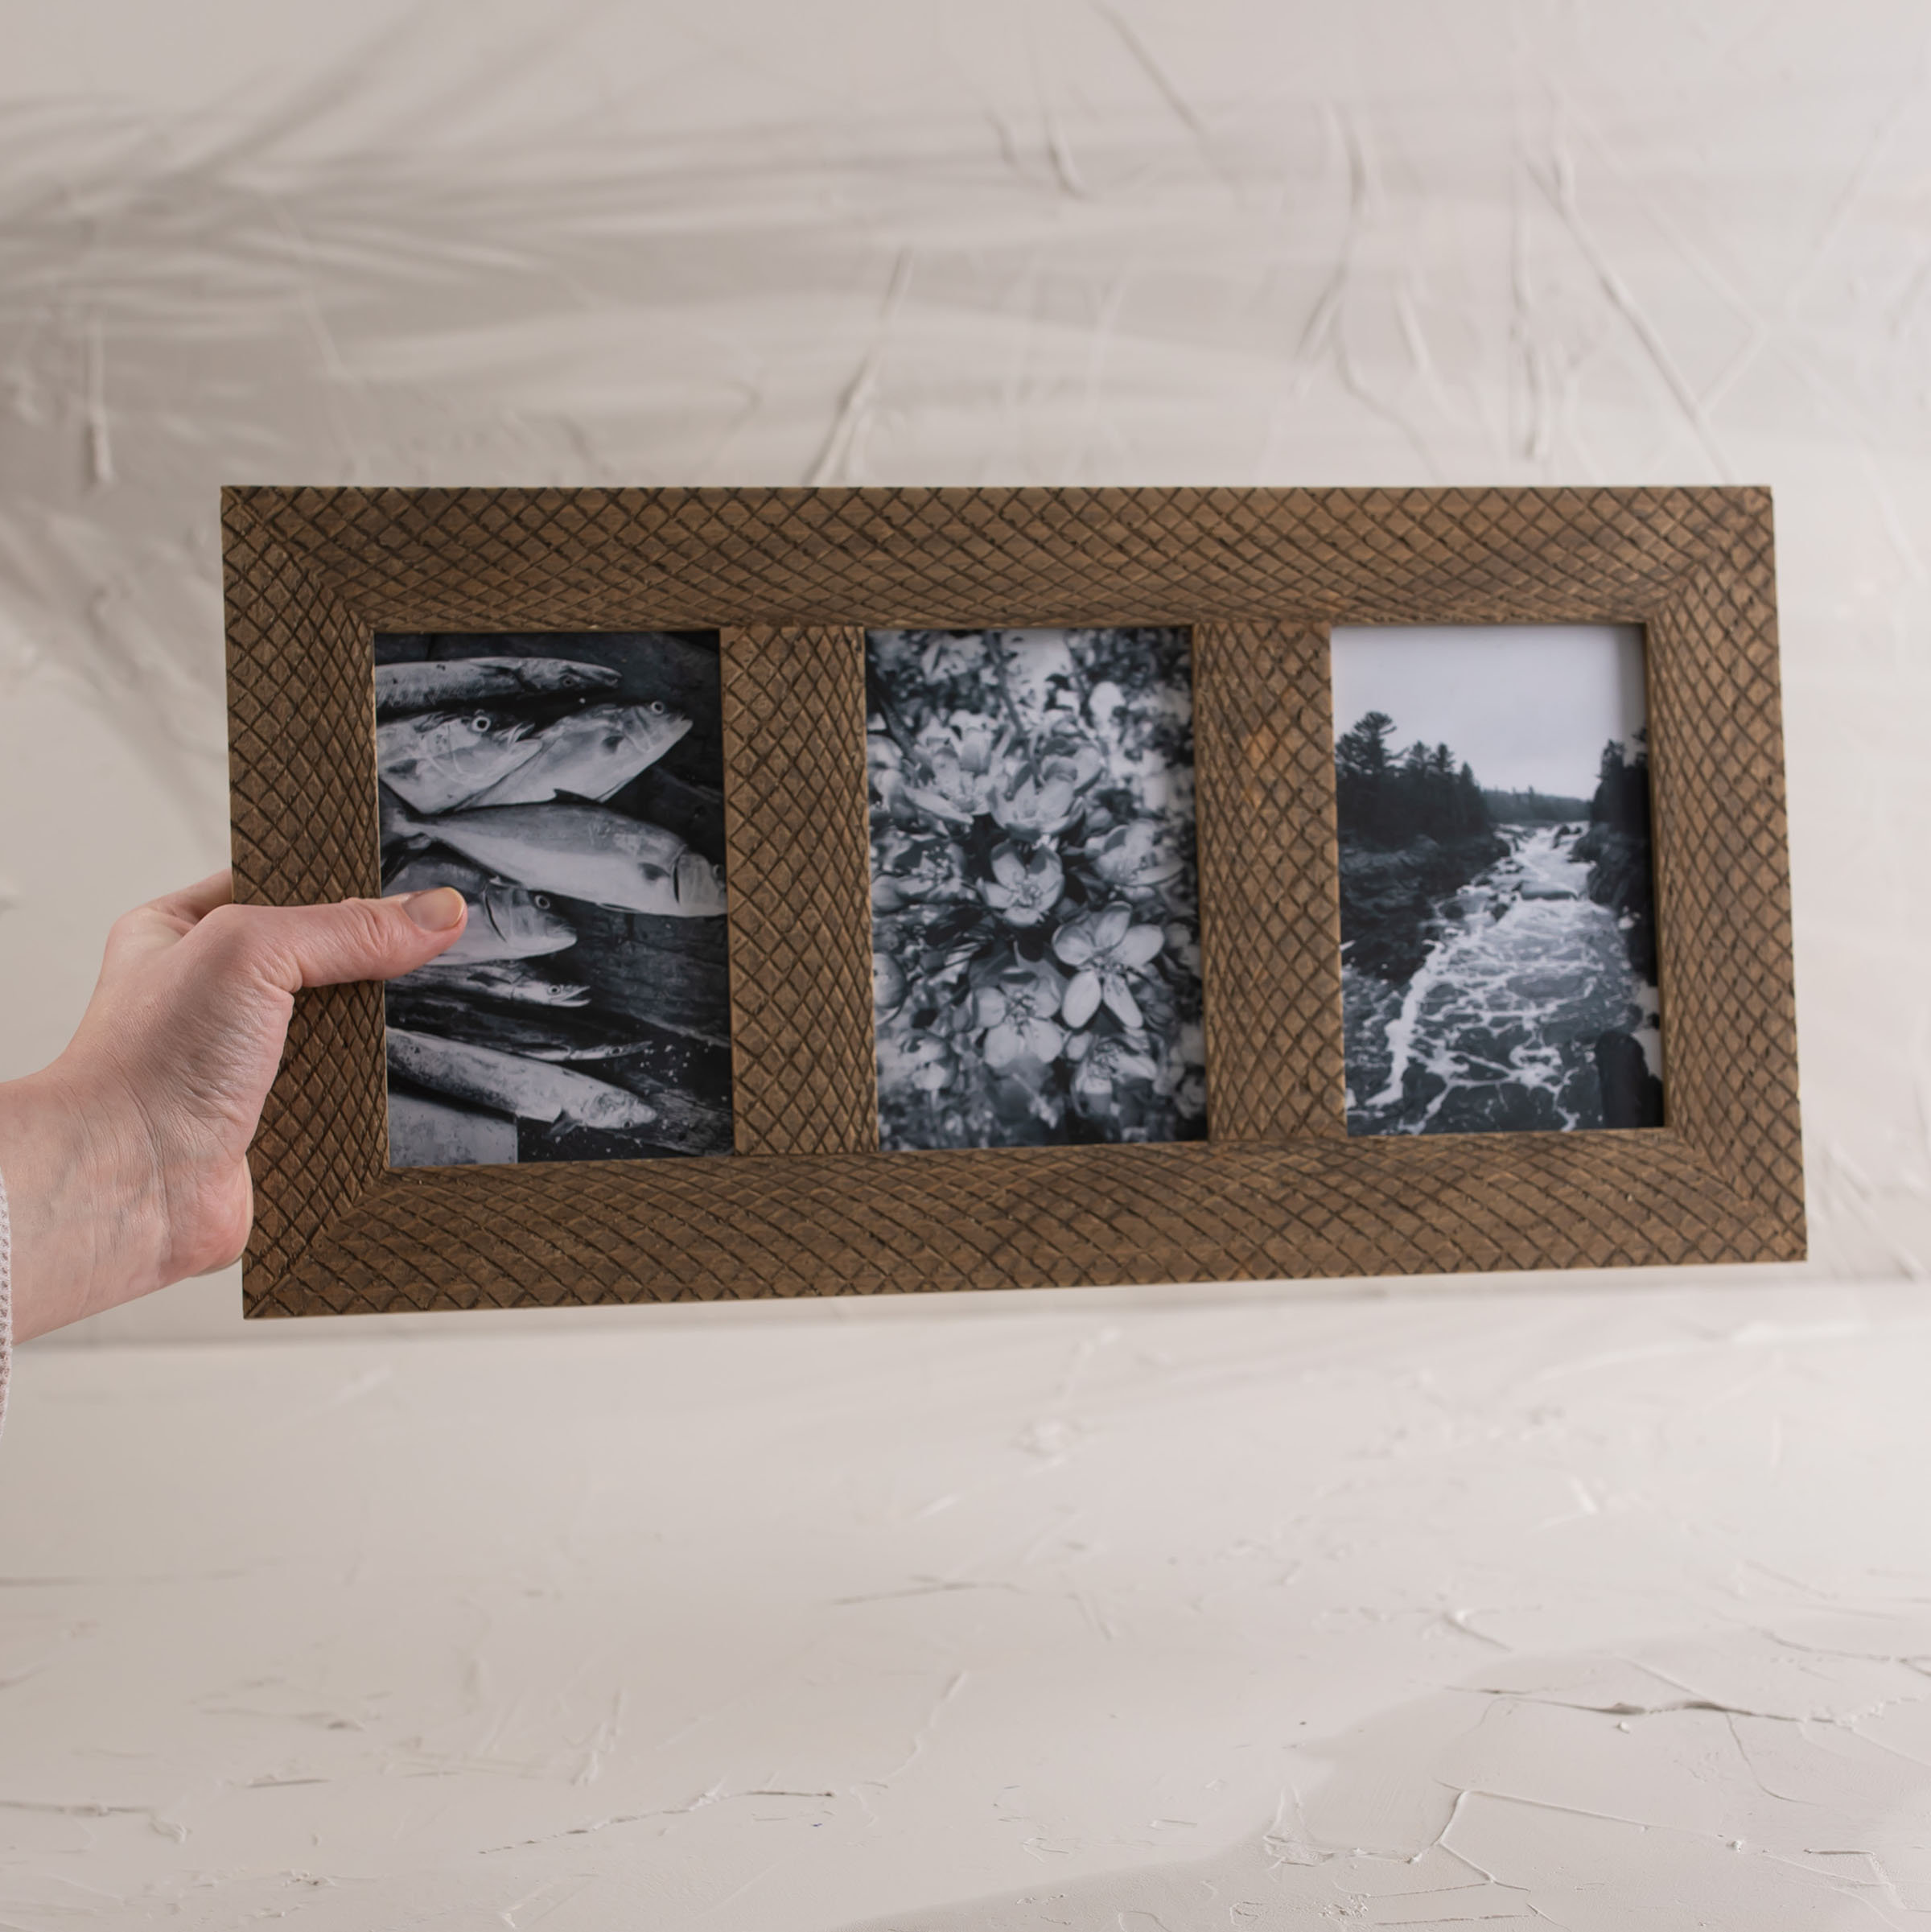 4x6 Inch Rustic Patched Picture Frame Wood, MDF & Glass by Foreside Home &  Garden